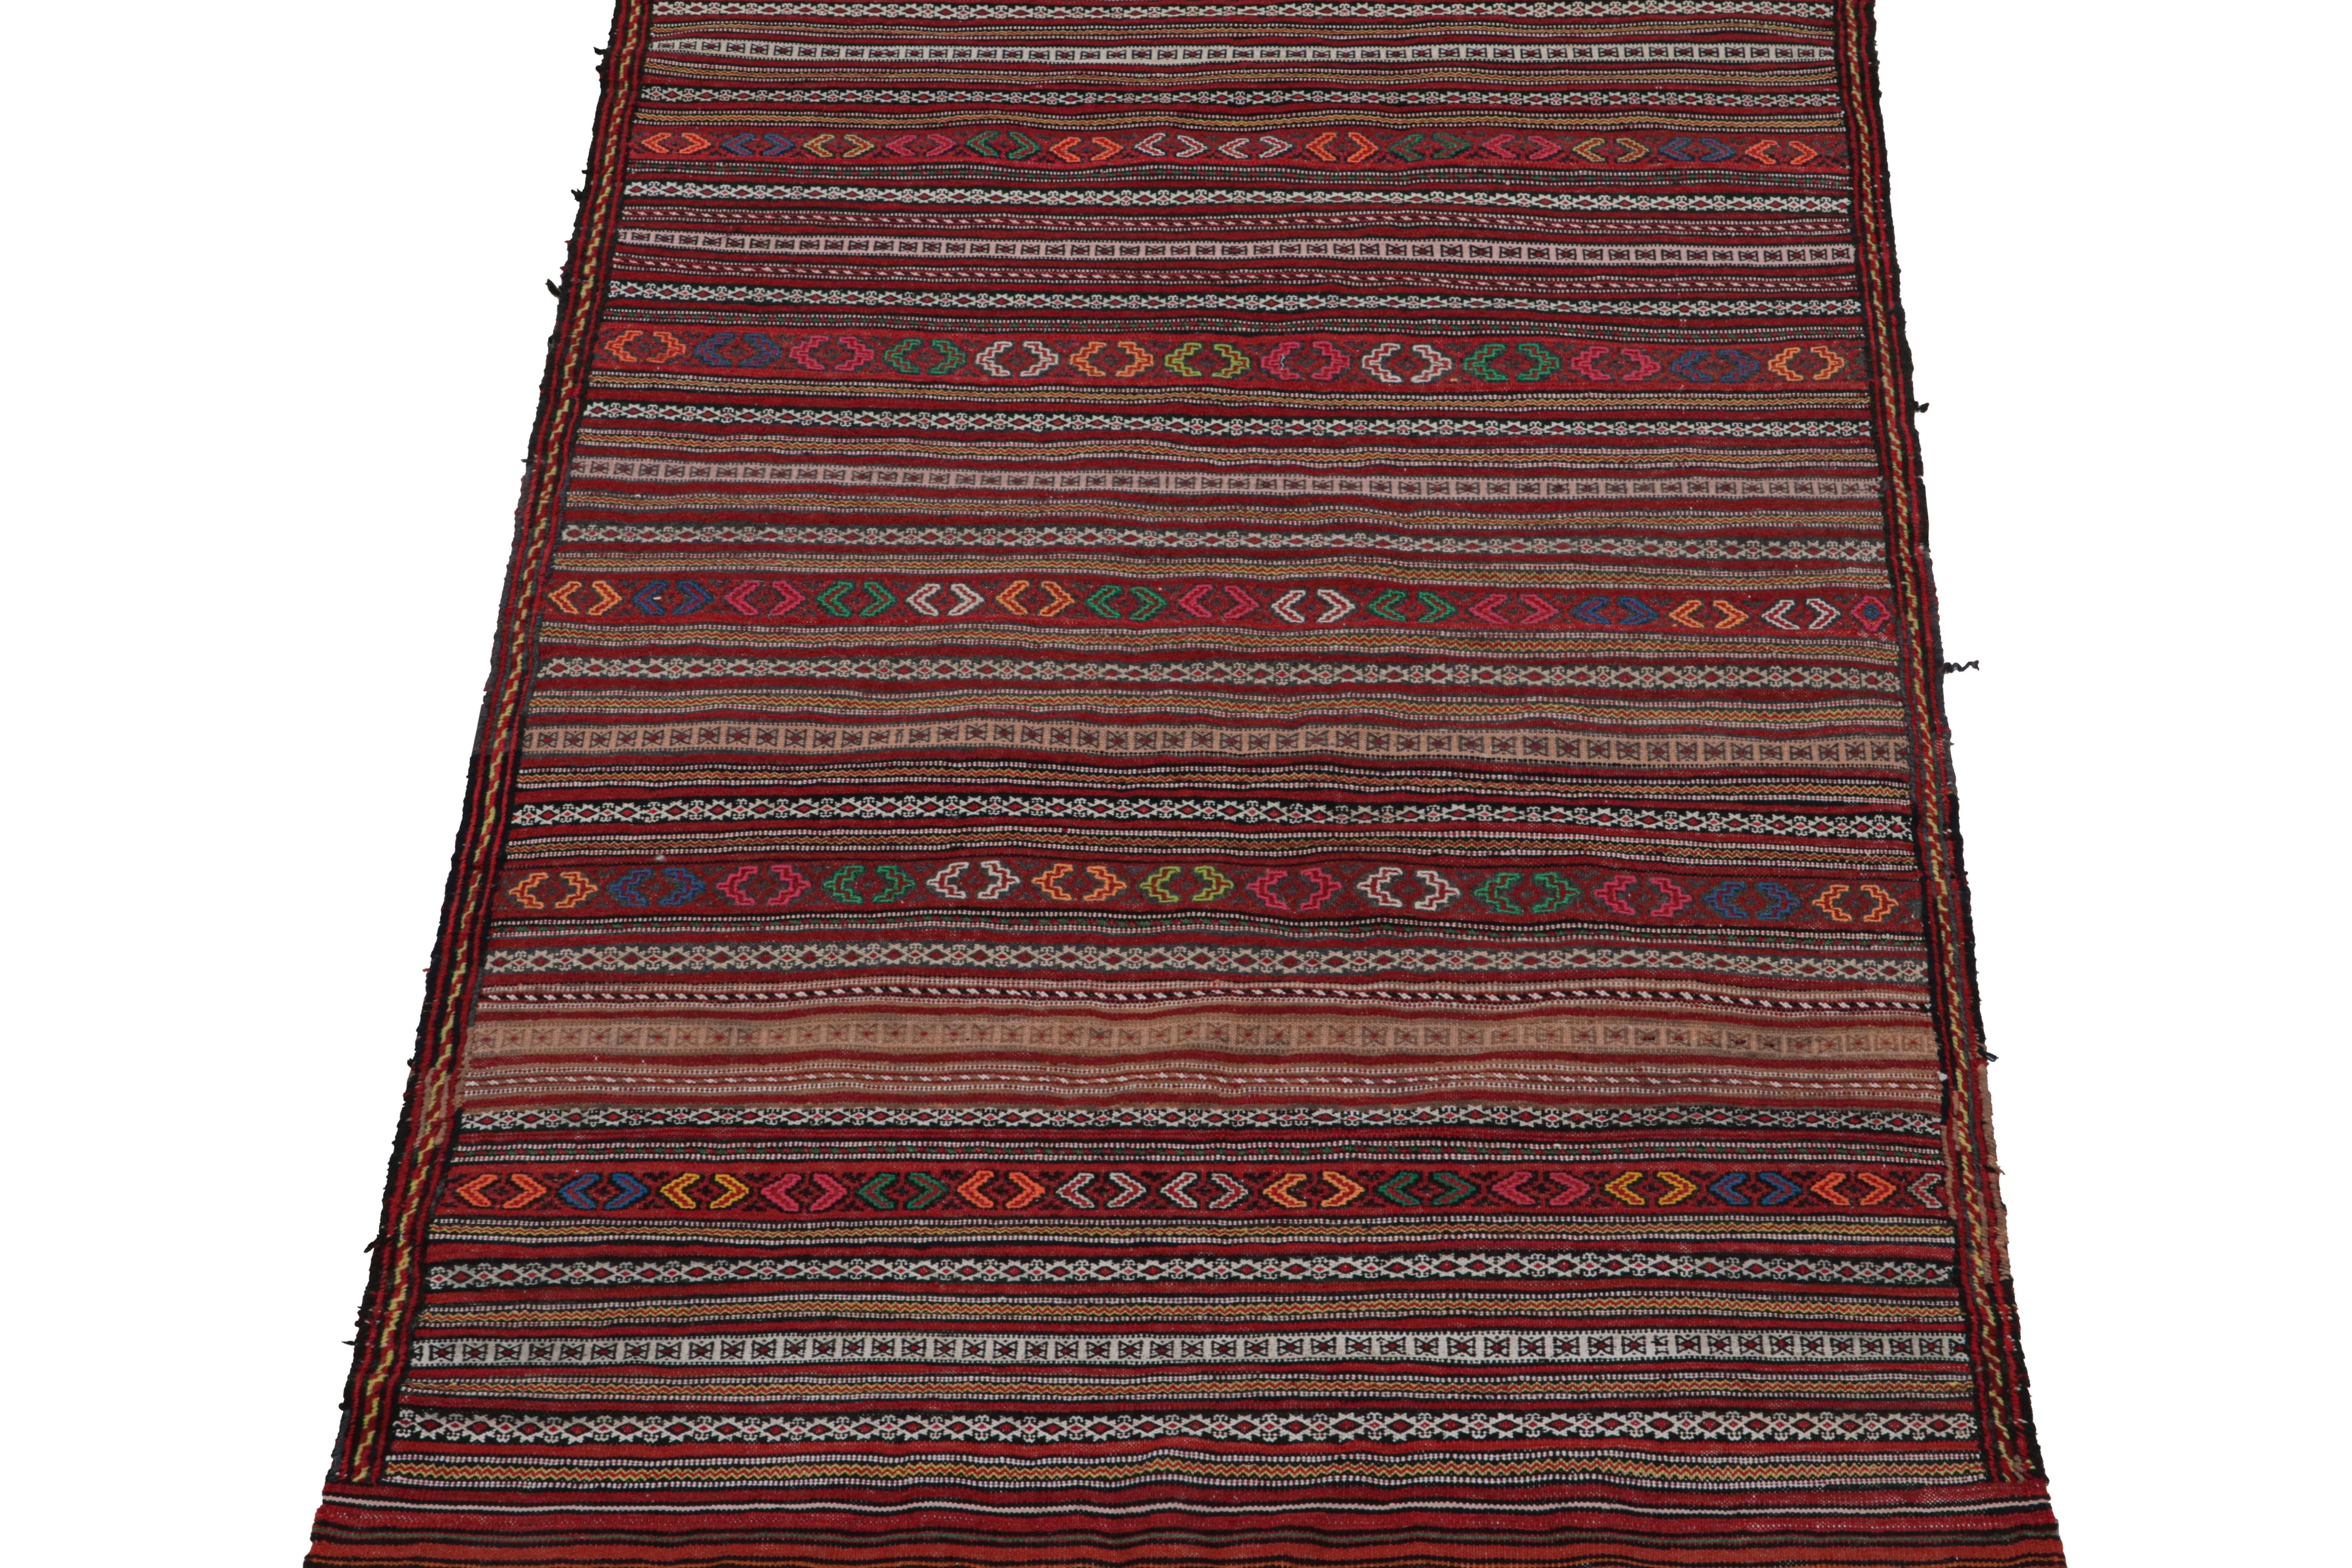 Afghan Vintage Baluch Kilim Rug in Red with Stripes and Tribal Motifs, from Rug & Kilim For Sale